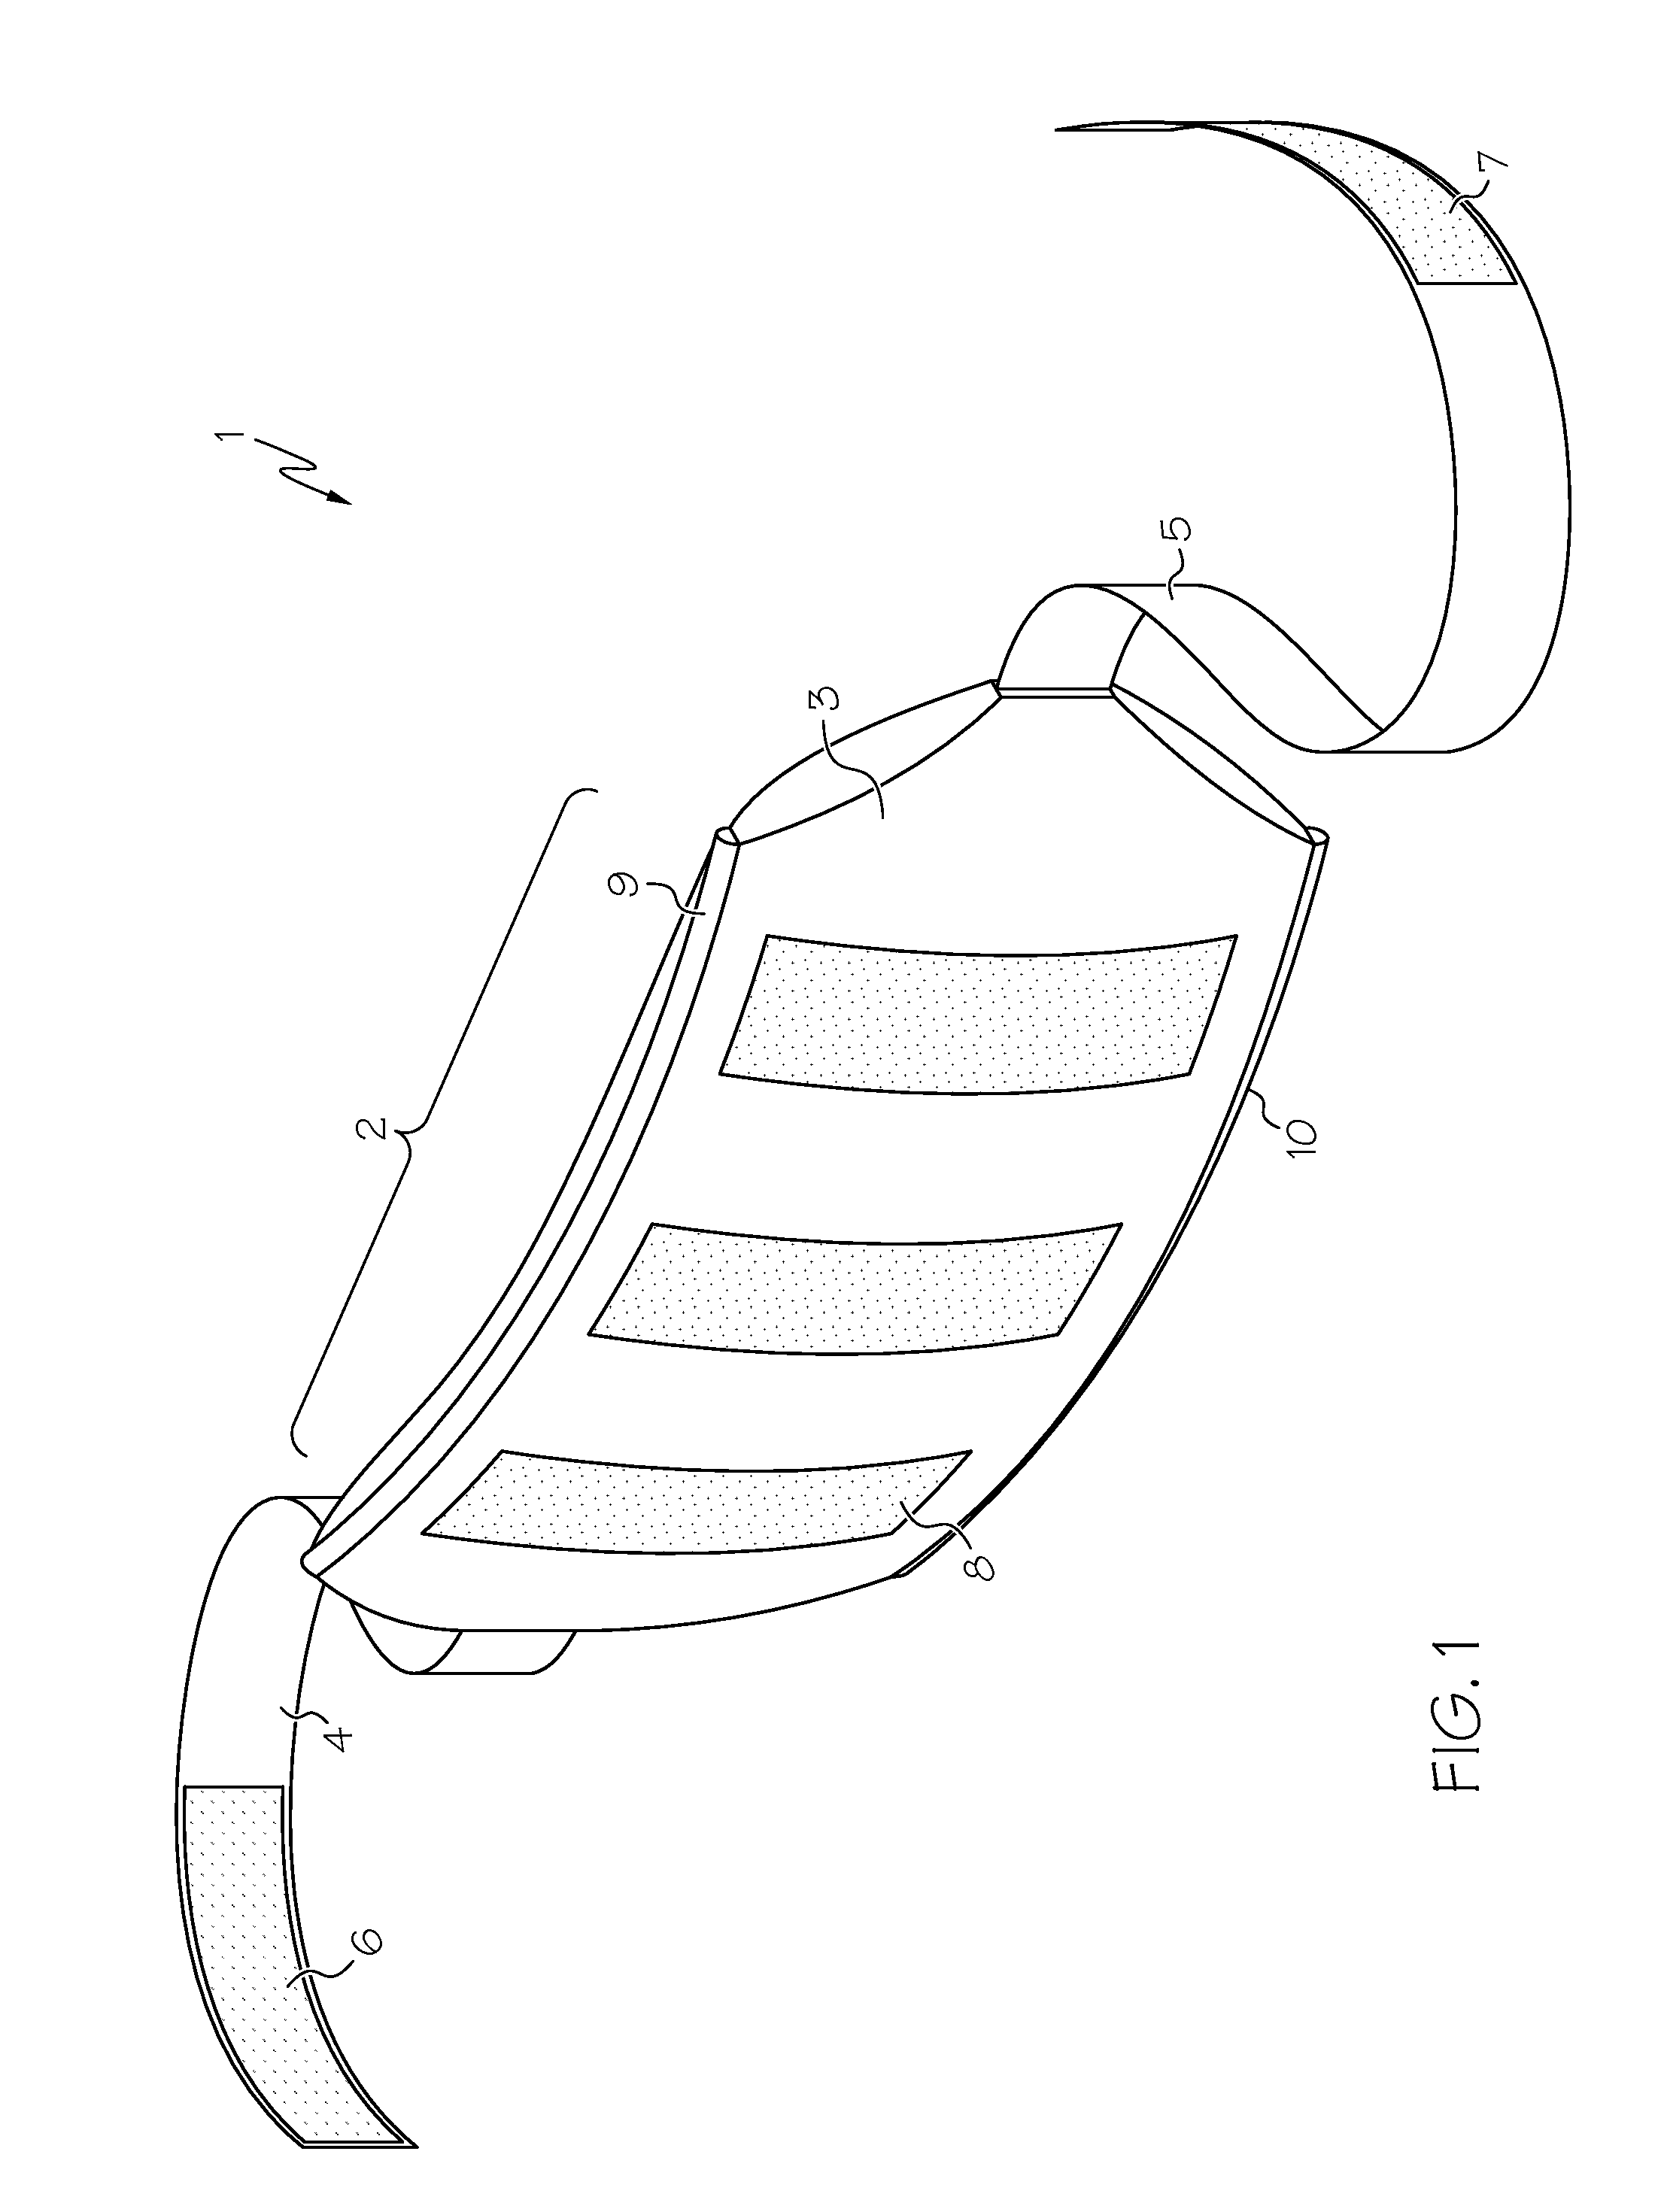 Anterior load carriage stability and mobility support system